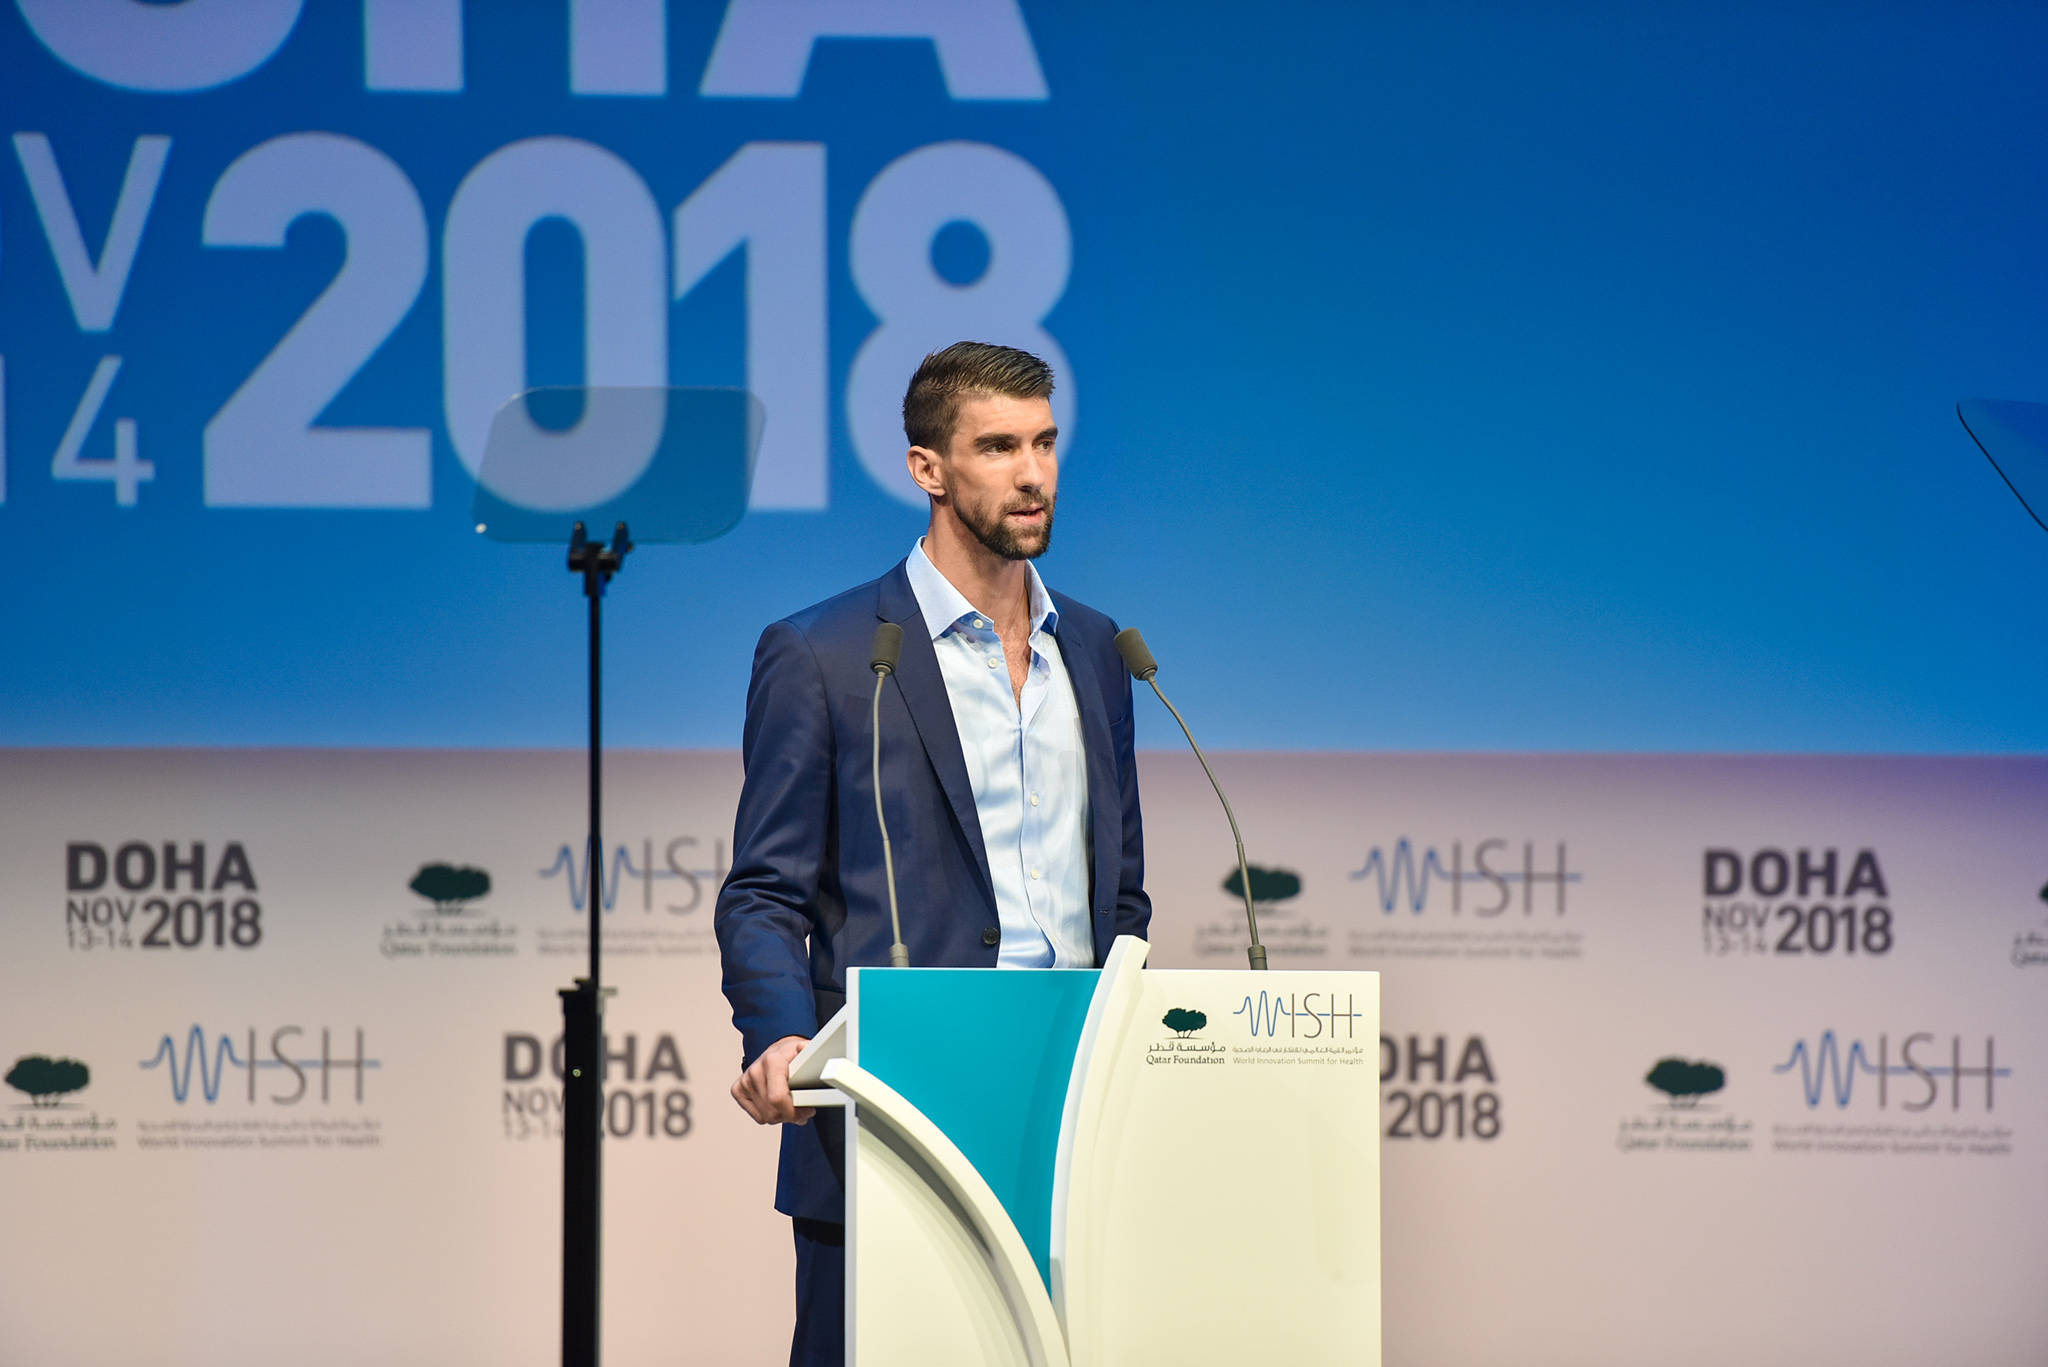 Michael Phelps: Winning Gold Medals Was “Easy” Compared To Coping With Depression